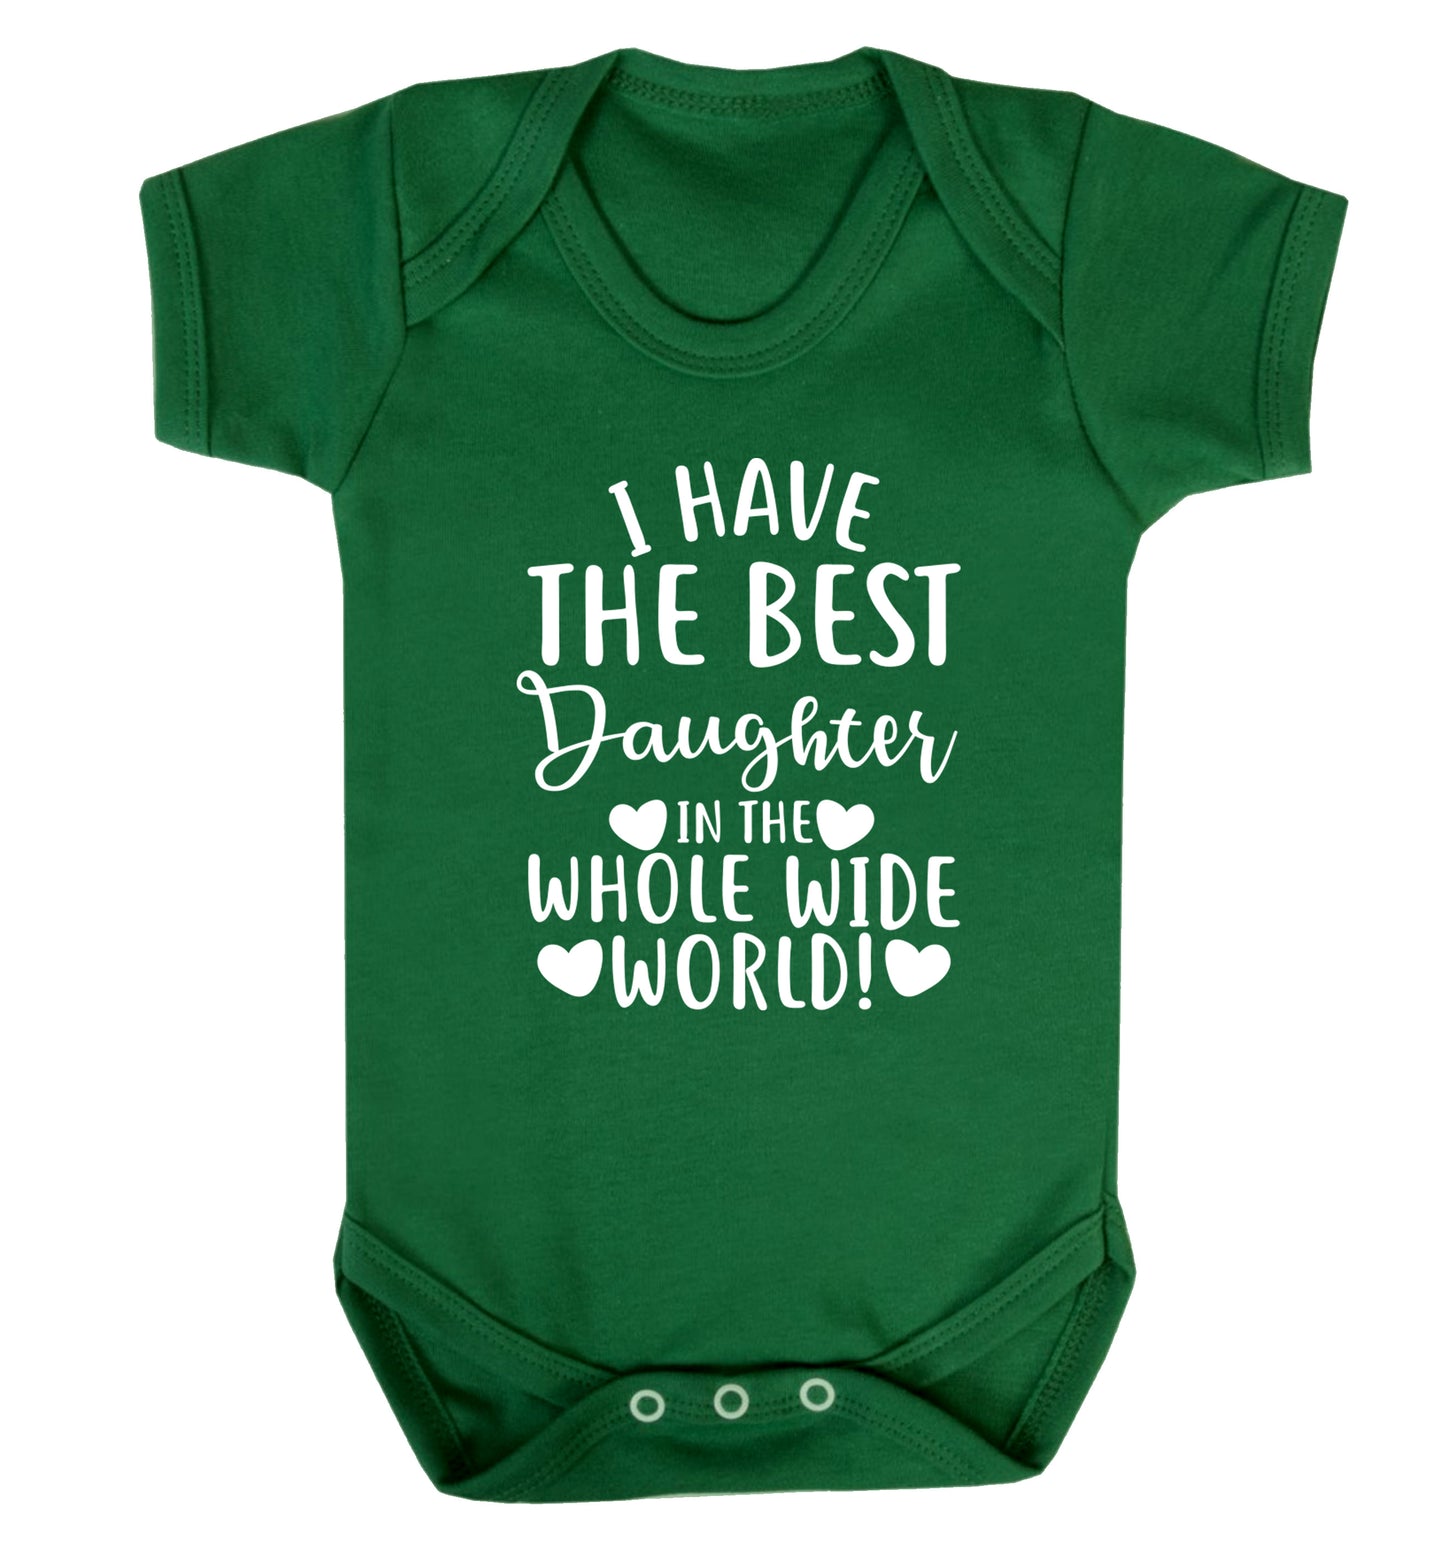 I have the best daughter in the whole wide world! Baby Vest green 18-24 months